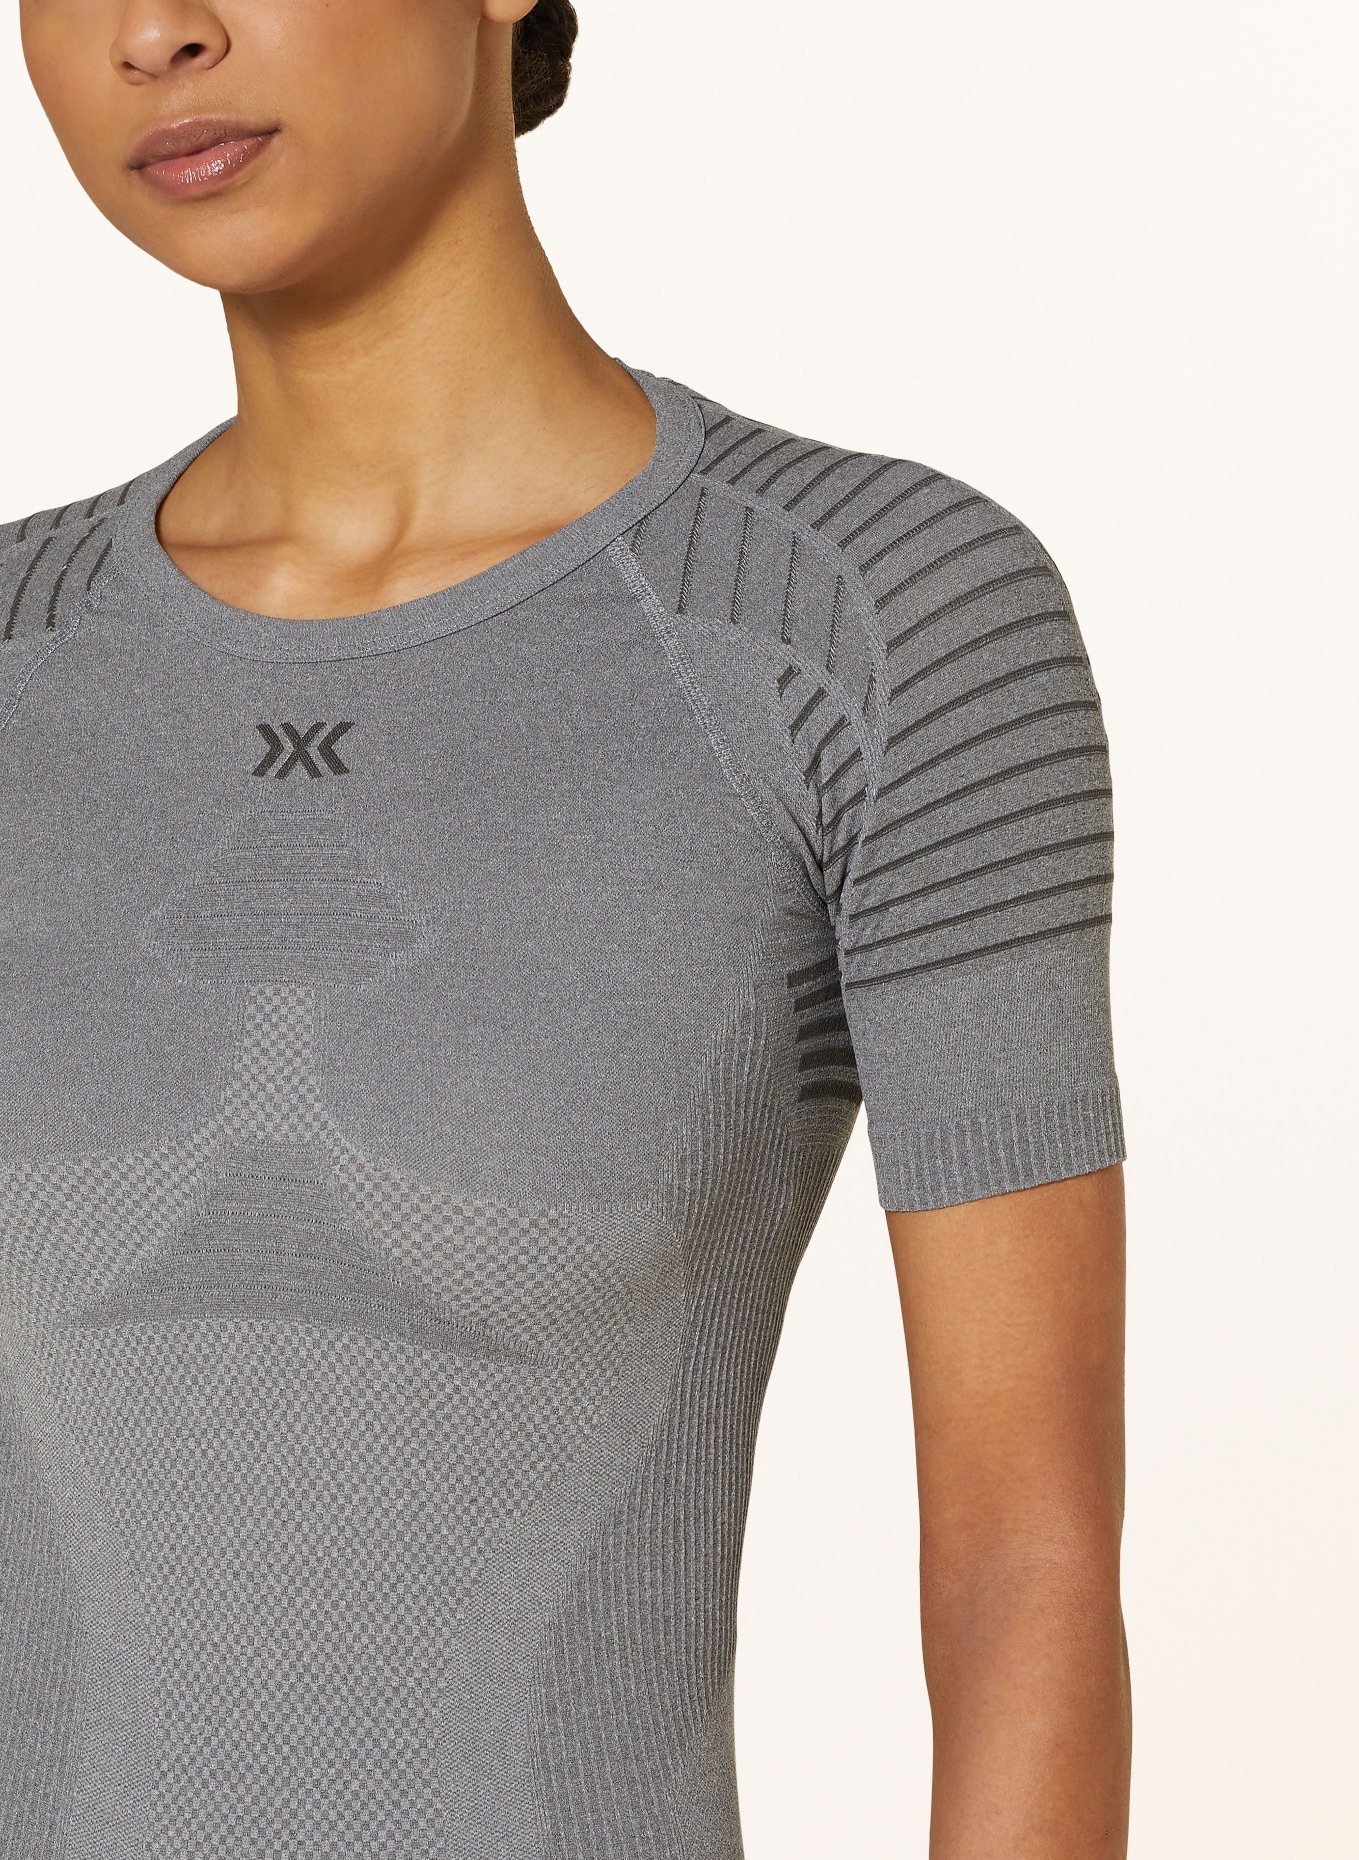 X-BIONIC Functional underwear shirt X-BIONIC® INVENT 4.0, Color: GRAY (Image 4)